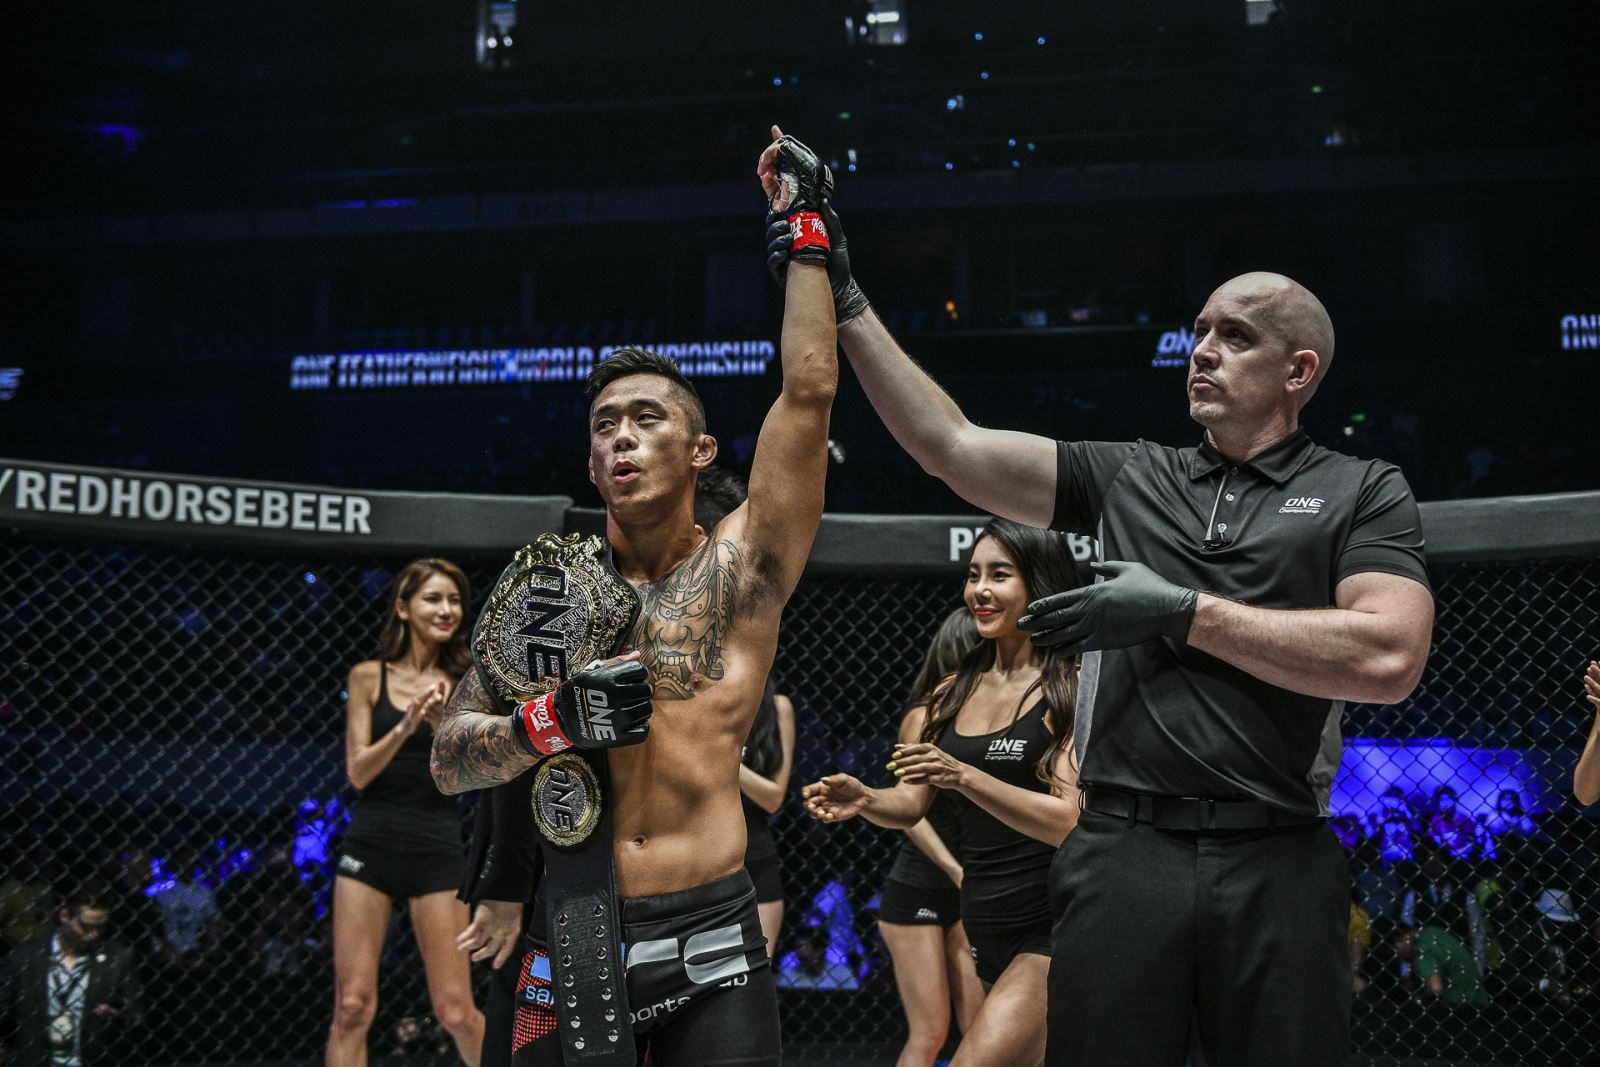 Martin Nguyễn, Roots of Honor, ONE Championship, ONE Featherweight, knock out,Jadamba Narantungalag"